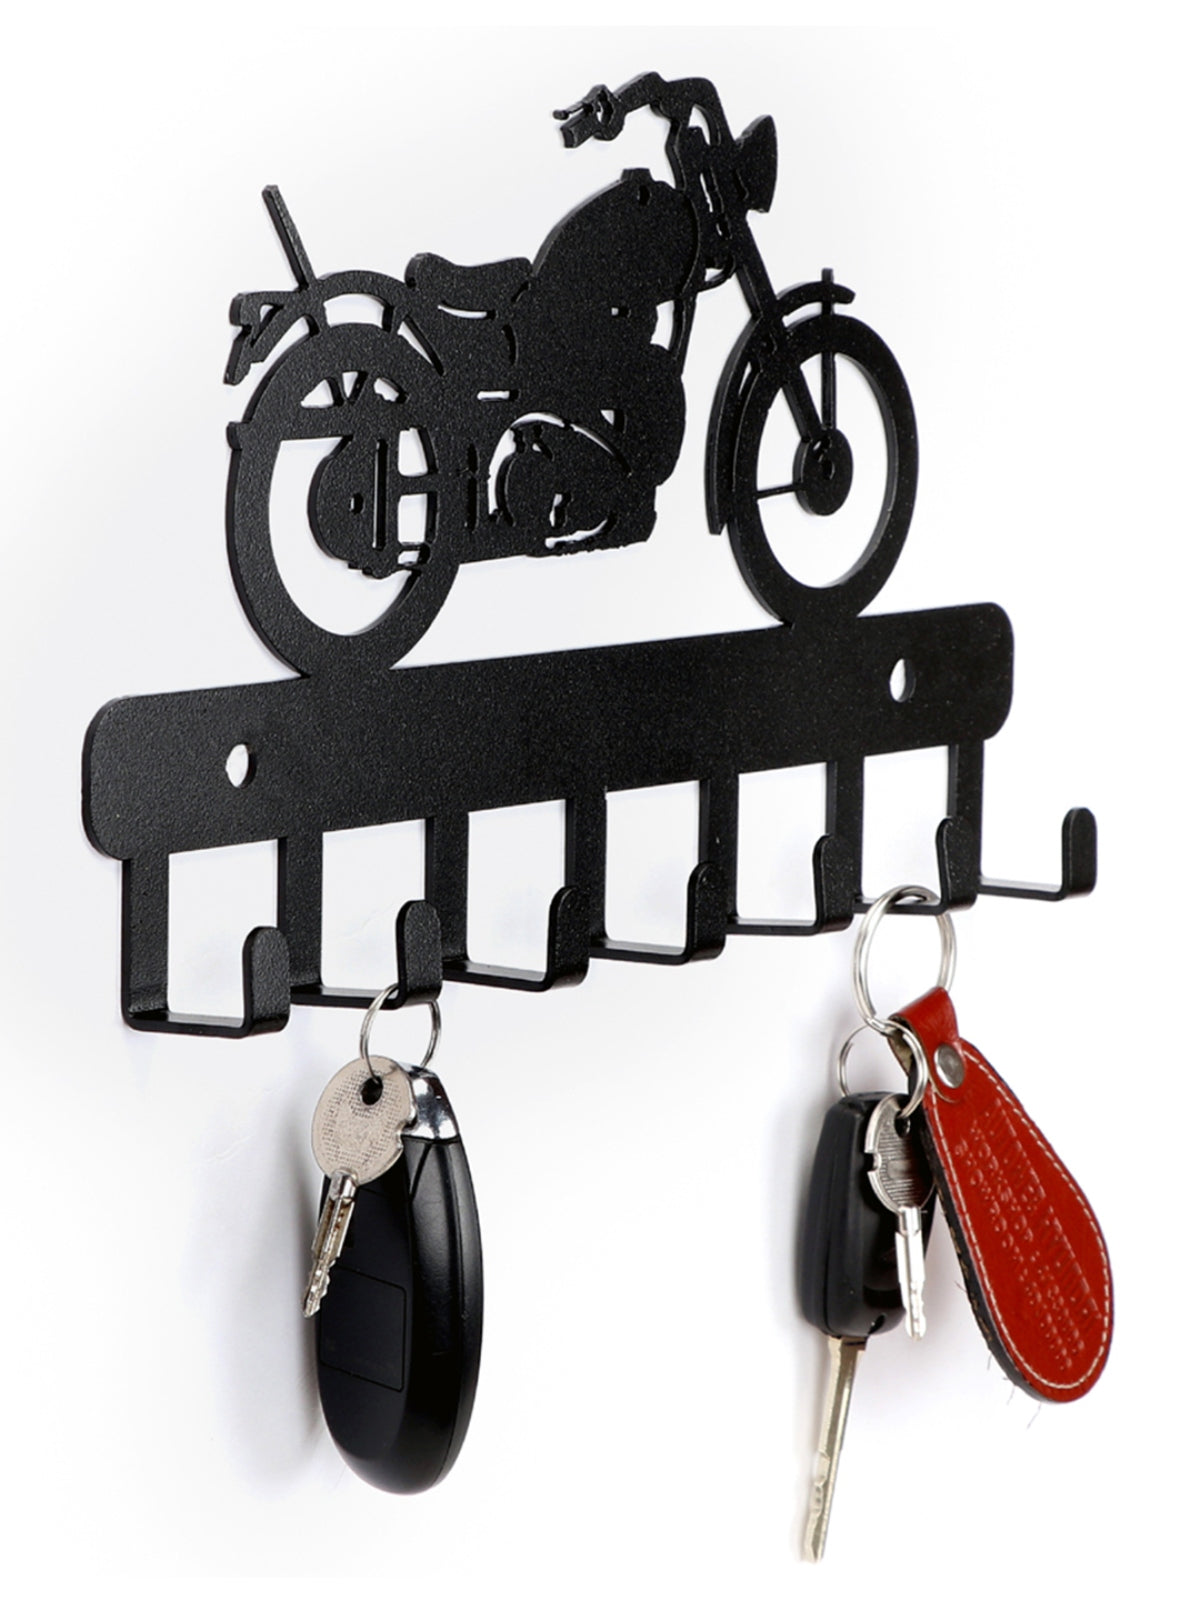 Metal Key Holder With 7 Hooks For Home & Office Wall Decorative